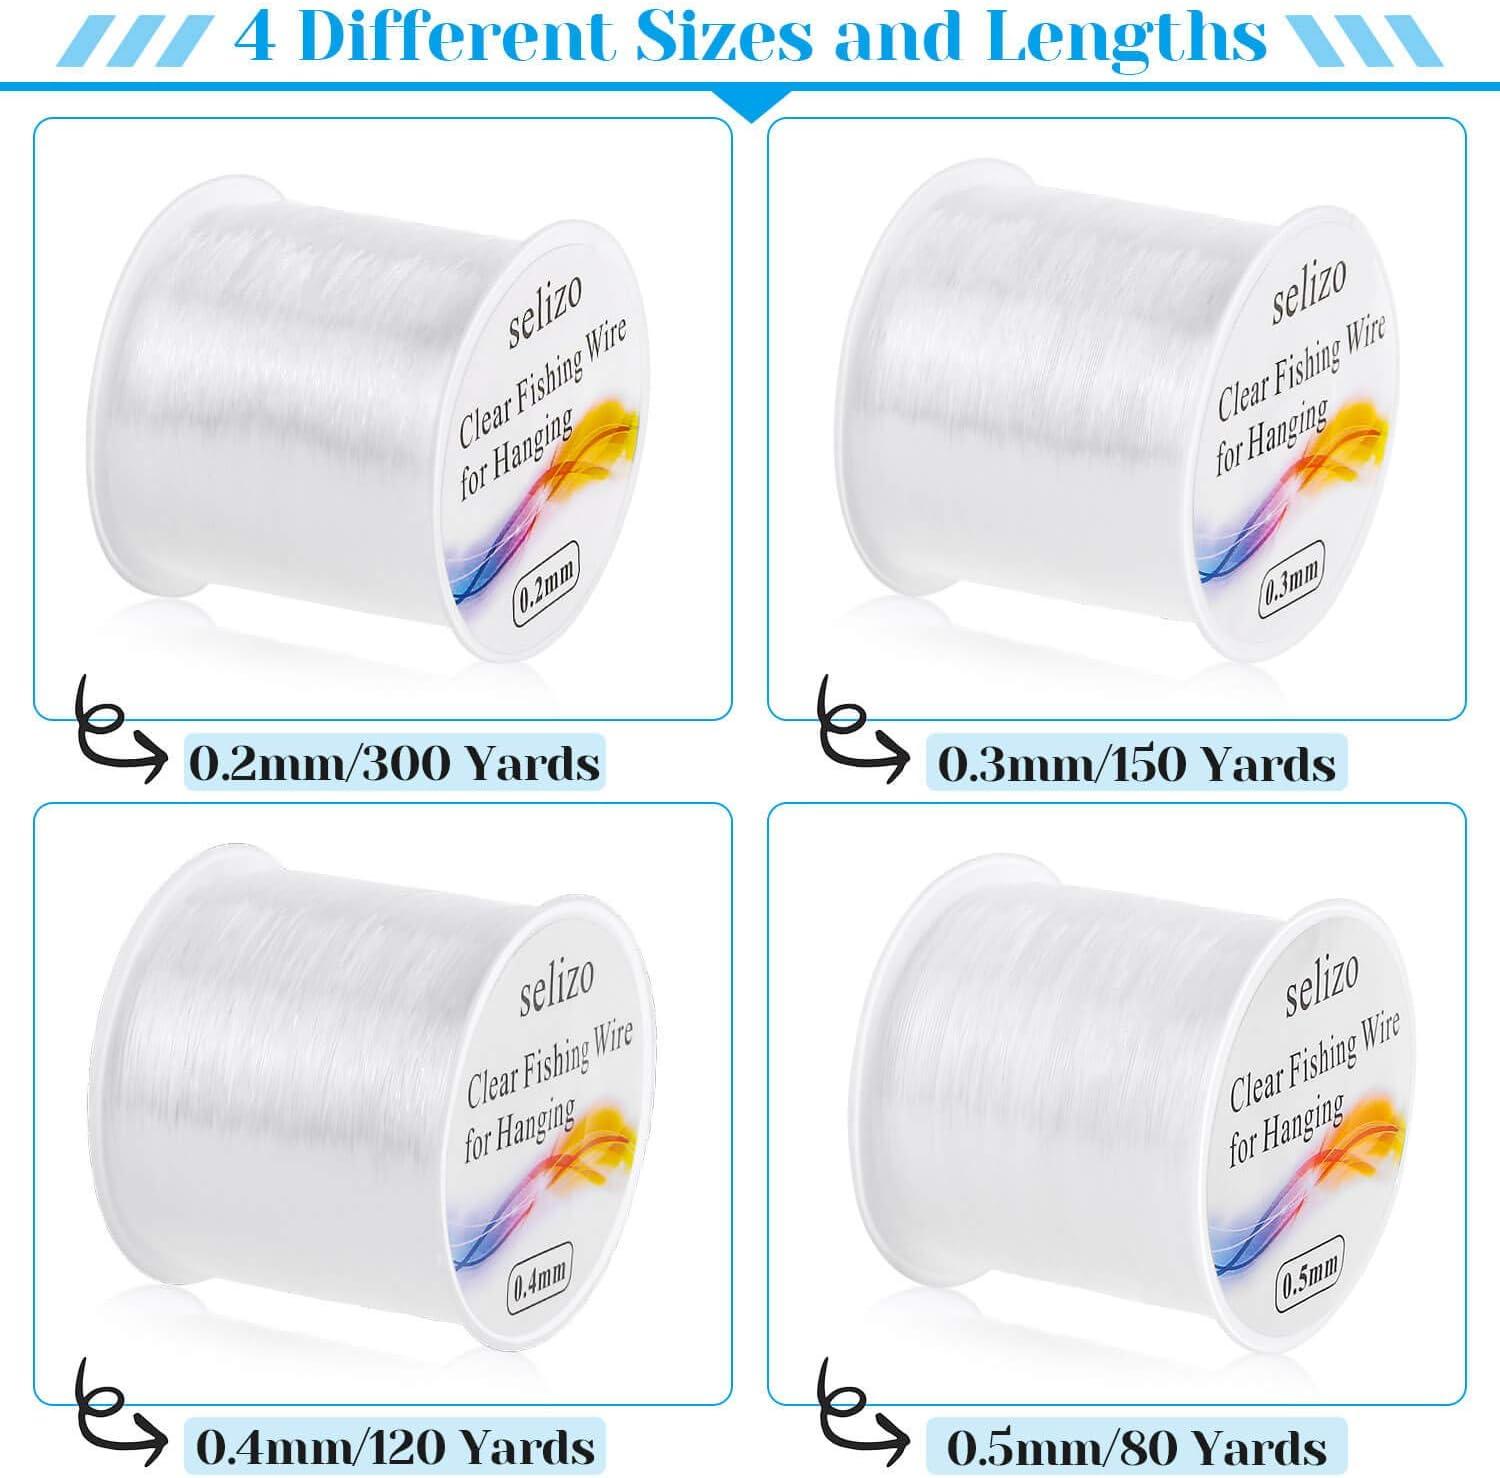 Fishing Wire for Hanging, Selizo 4Pcs Clear Fish Line Fishing String  Invisible Monofilament Nylon Thread for Hanging Decorations, Balloon  Garland, Jewelry Making, Beading and Crafts